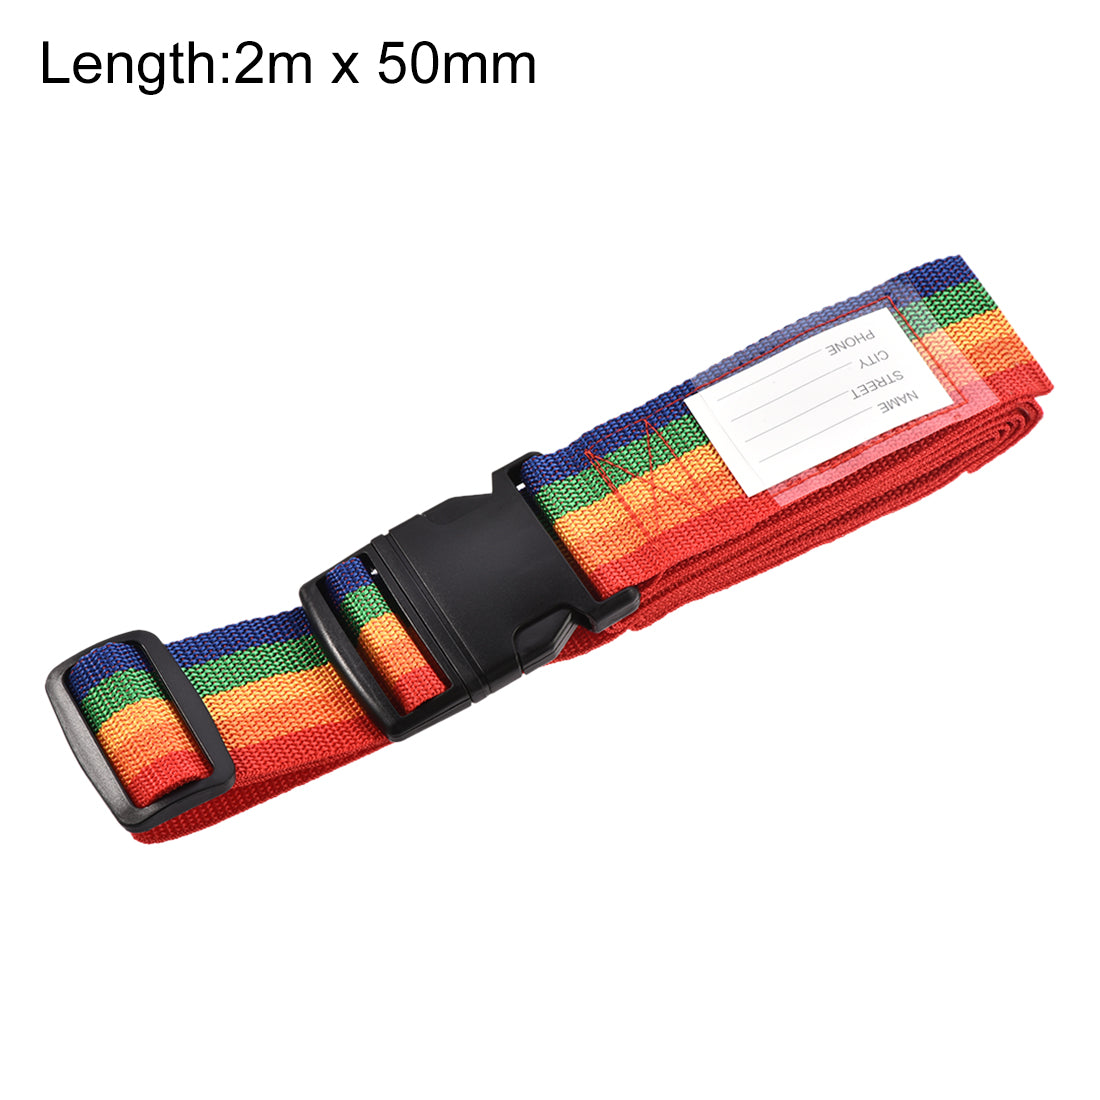 uxcell Uxcell Luggage Strap Suitcase Belt with Buckle Label, 2Mx5cm Adjustable PP Travel Bag Packing Accessory, Multi Color (Red Orange Yellow Green Blue)